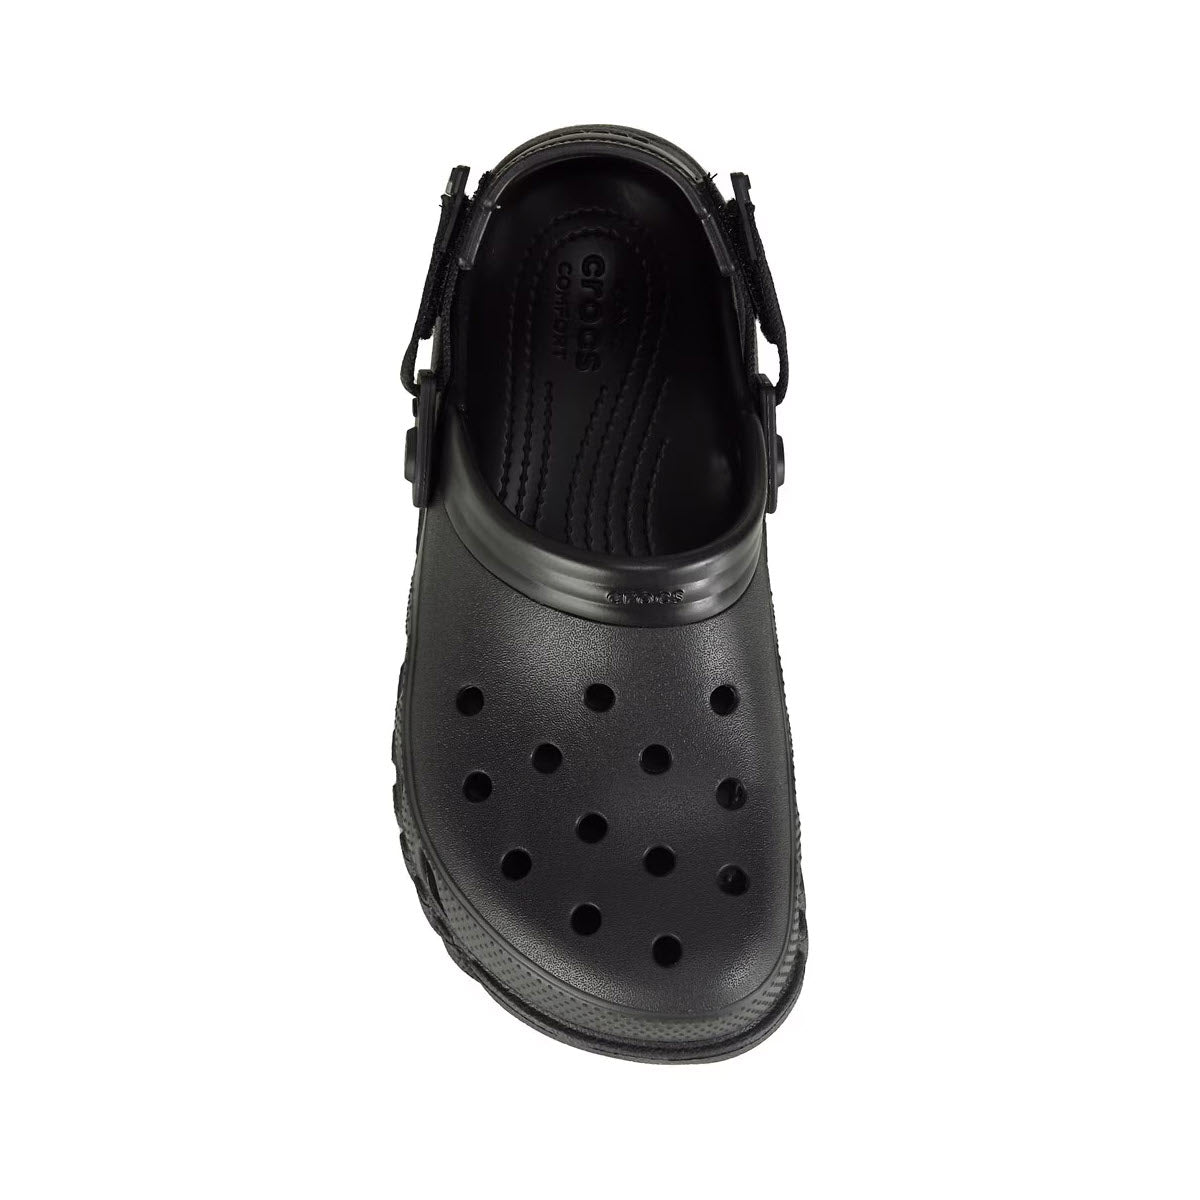 A top-down view of a single black Crocs DUET MAX II CLOG BLACK - MENS clog with adjustable back straps, displayed on a white background.